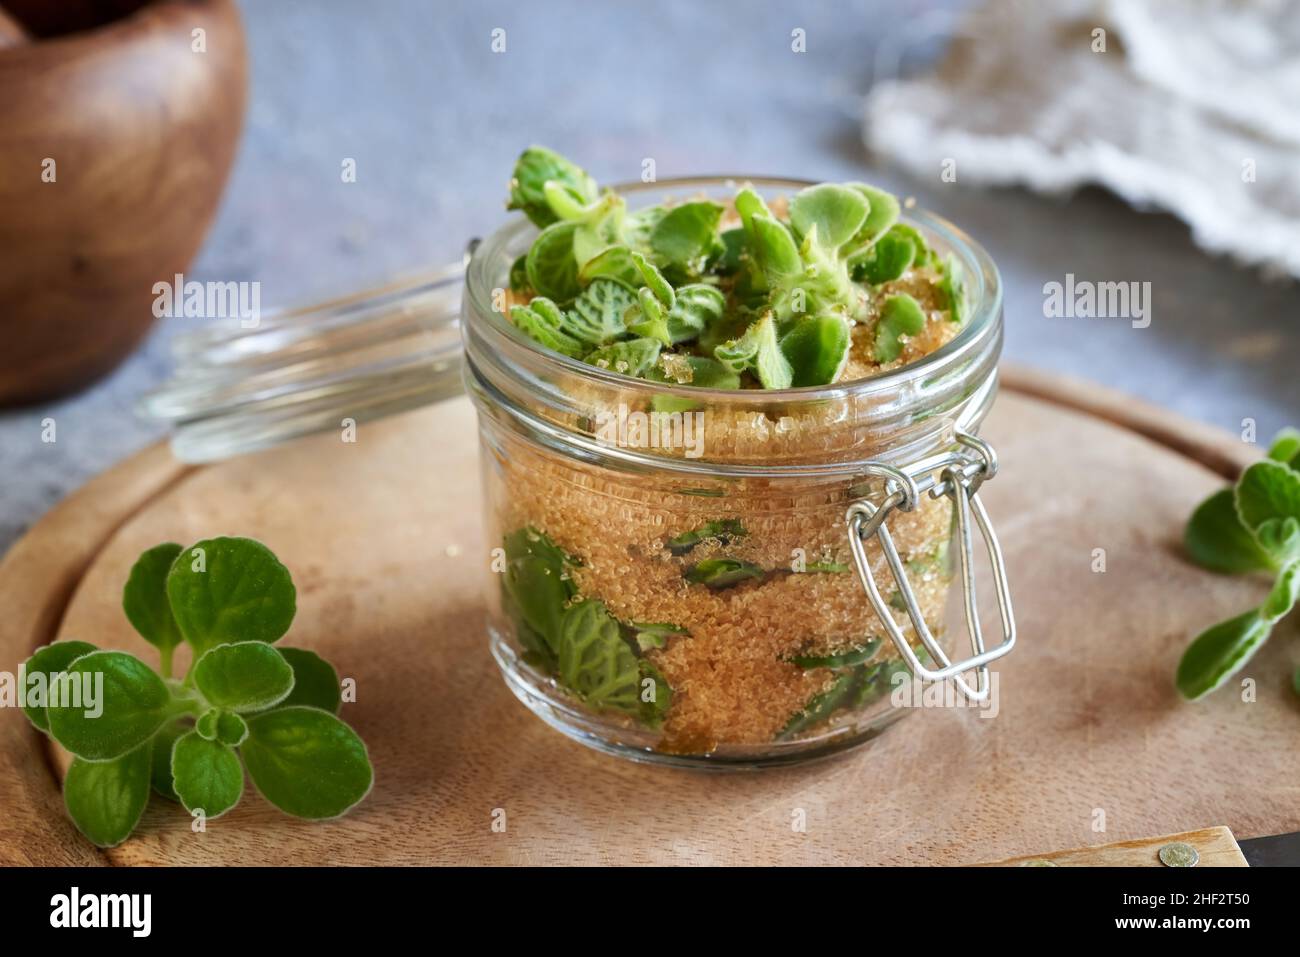 Preparation of a herbal syrup against common cold from silver spurflower and cane sugar in a glass jar Stock Photo